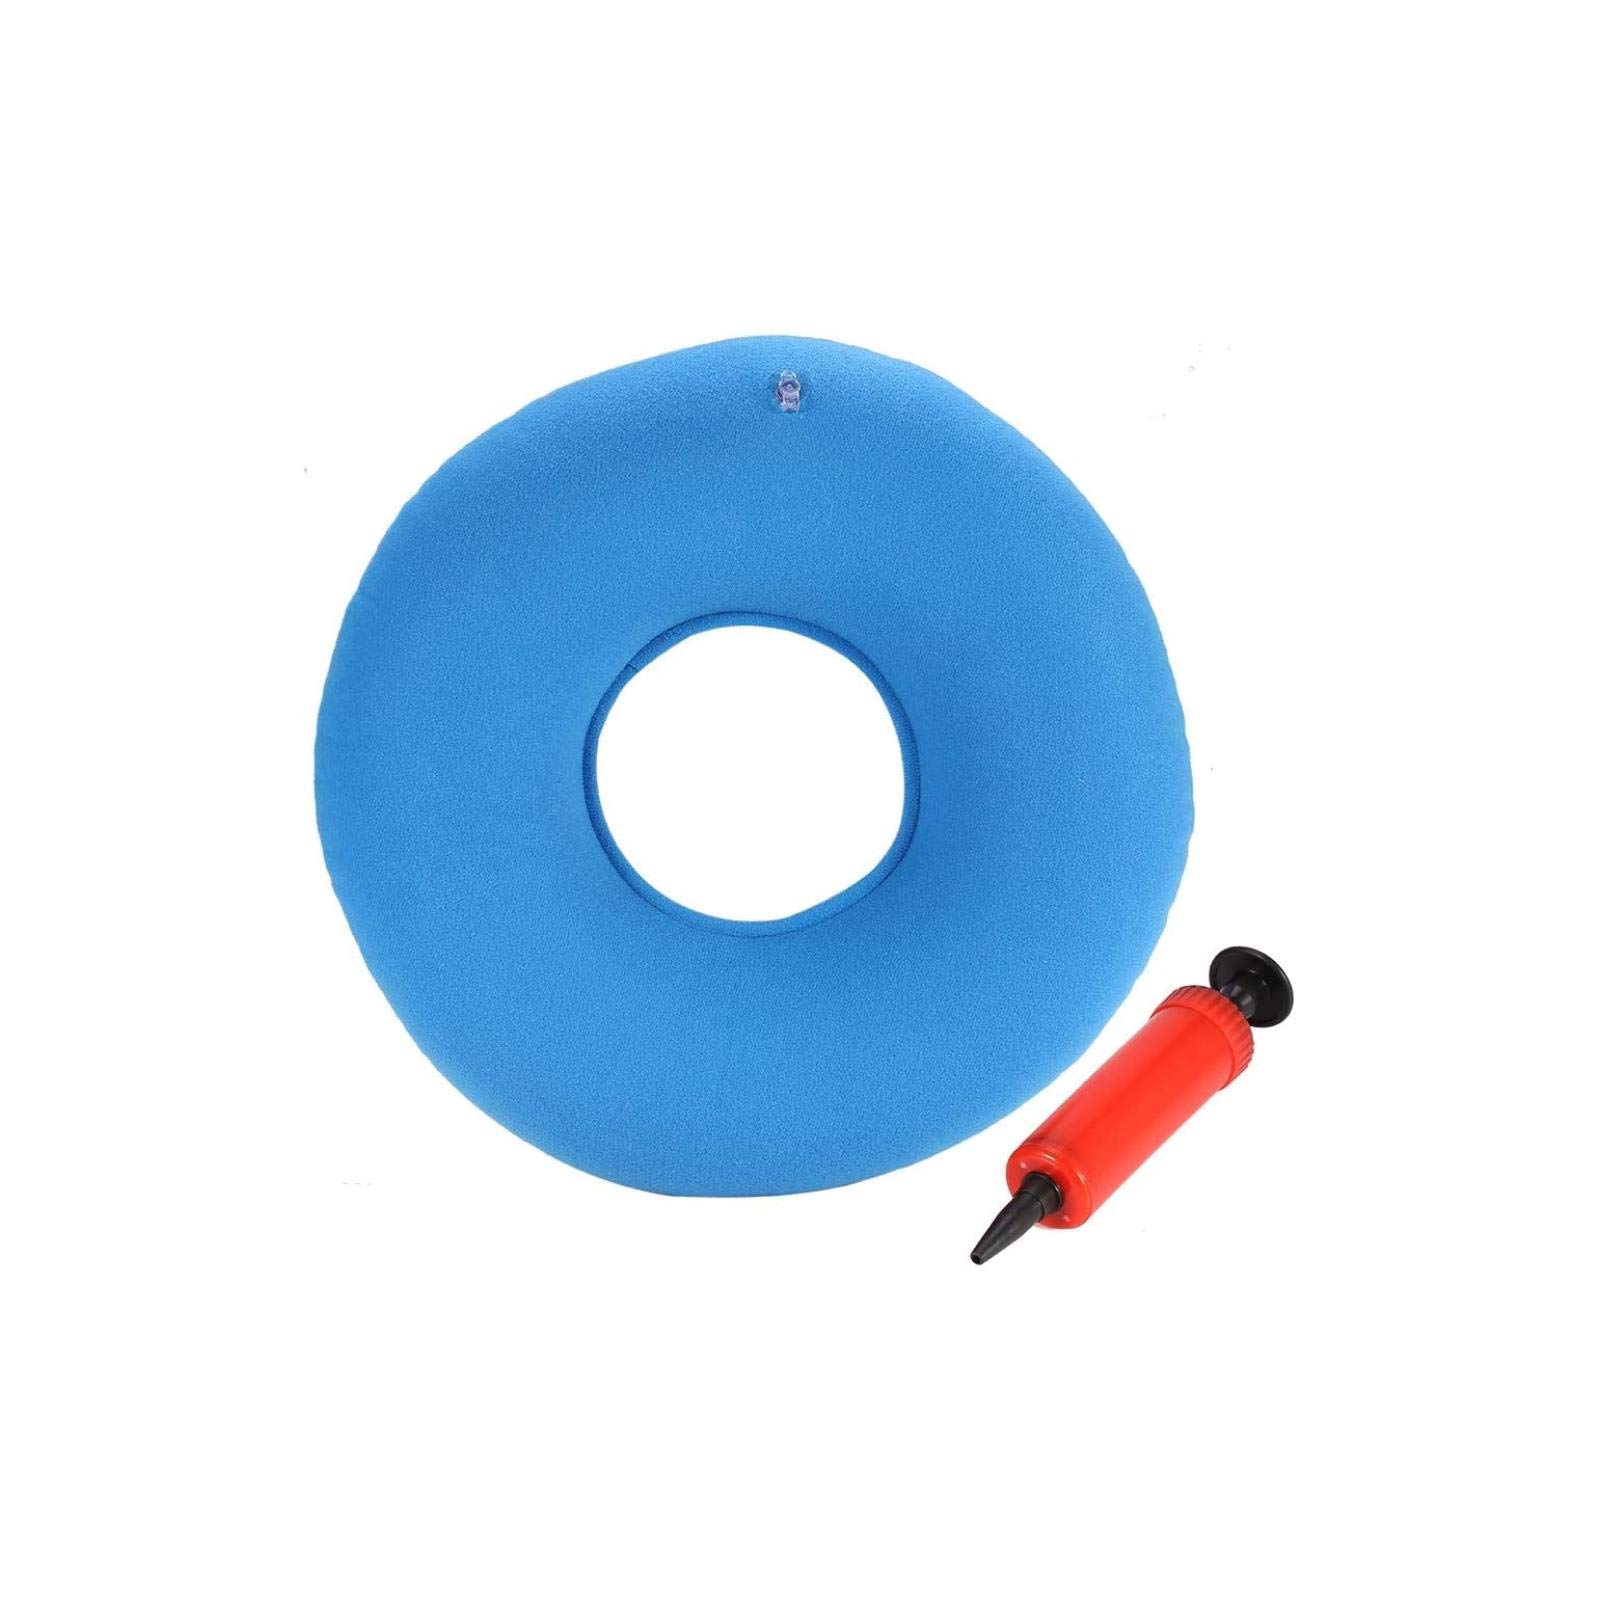 Boquite Donut Tailbone Pillow Hemorrhoid Cushion - New Inflatable Round Chair Pad Hip Support Hemorrhoid Seat Cushion with Pump Donut Pillow for Tailbone Pain(Blue)